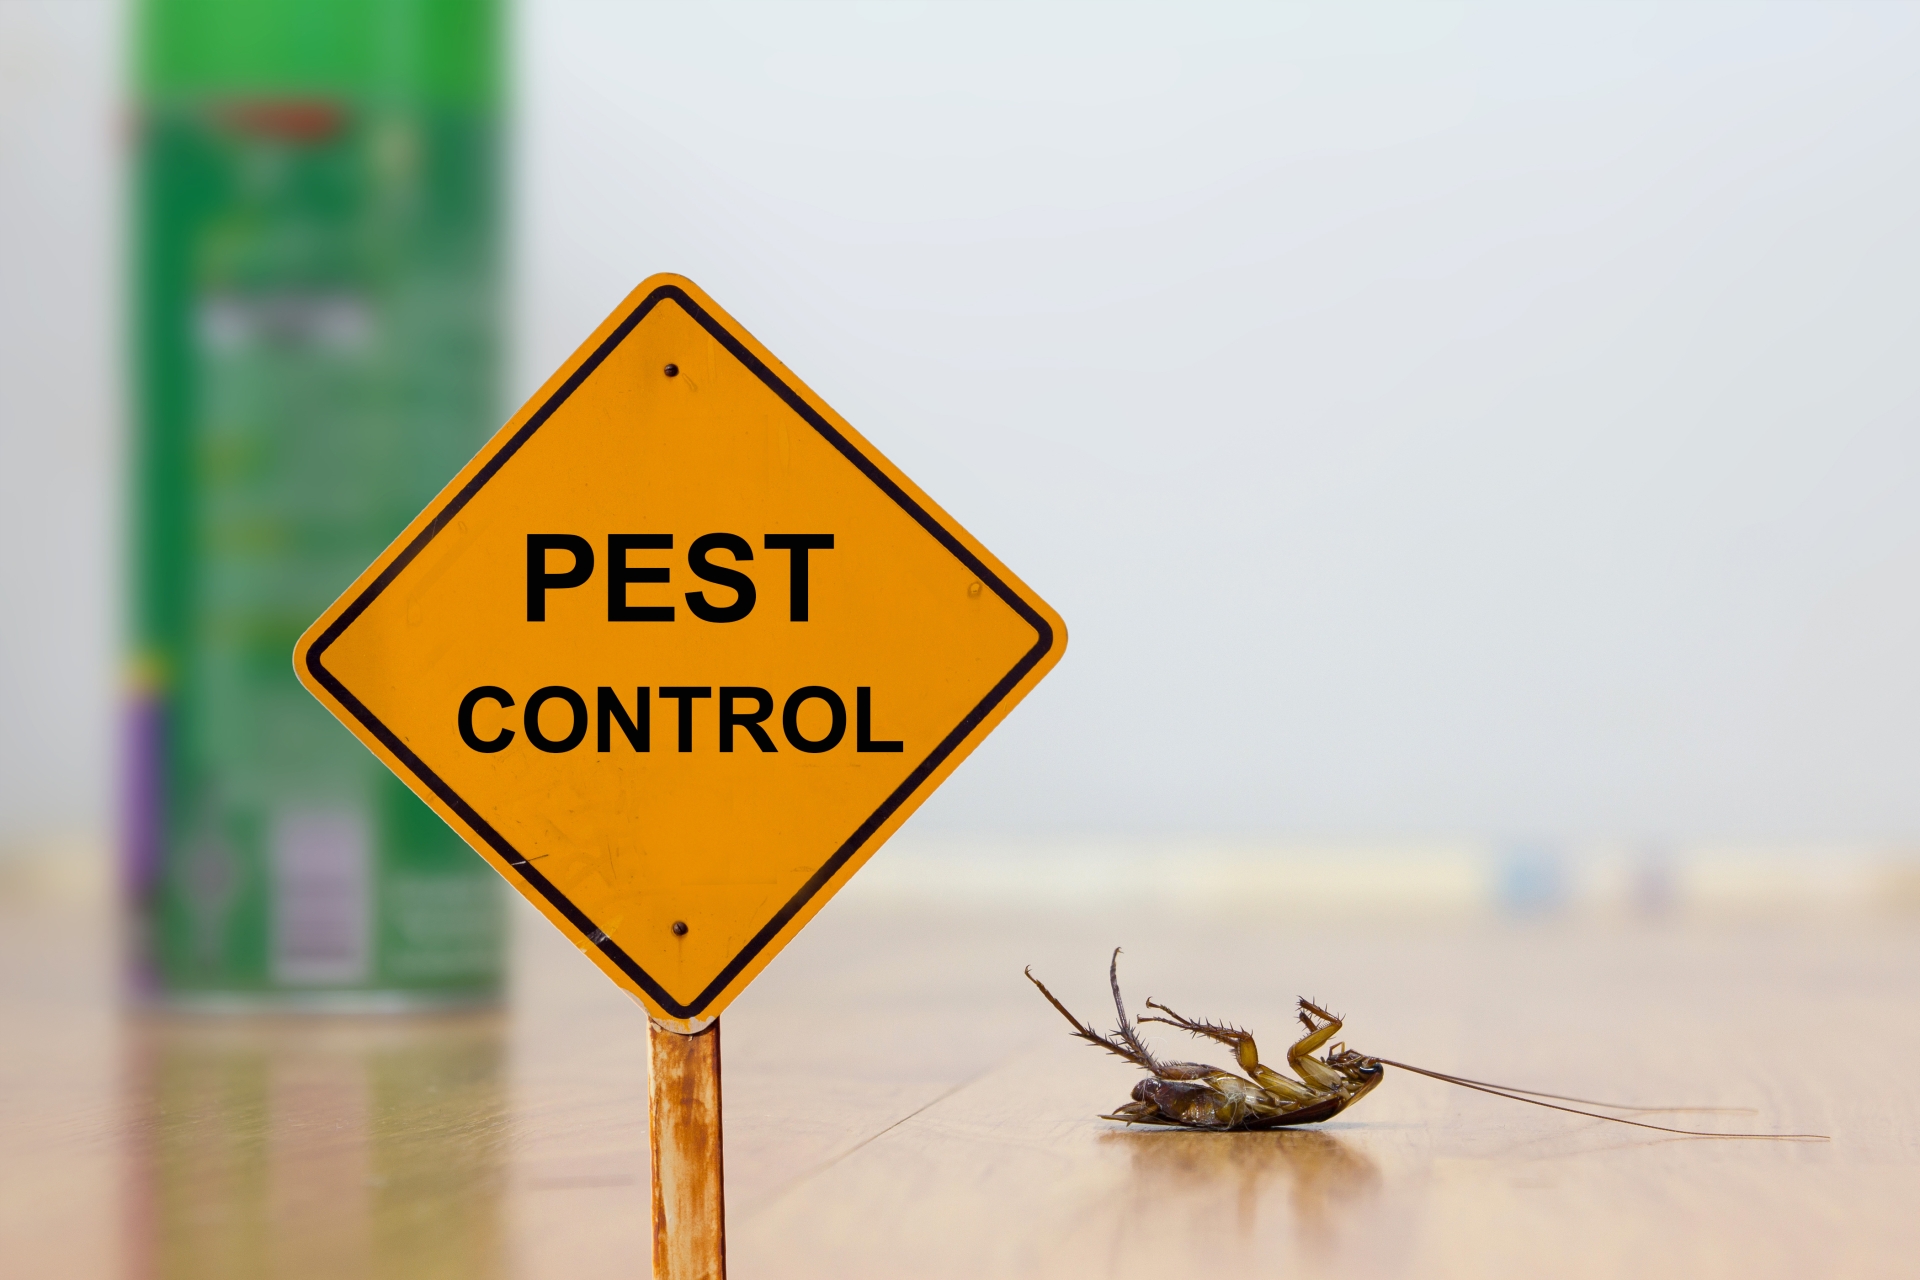 24 Hour Pest Control, Pest Control in Olympic Park, E20. Call Now 020 8166 9746